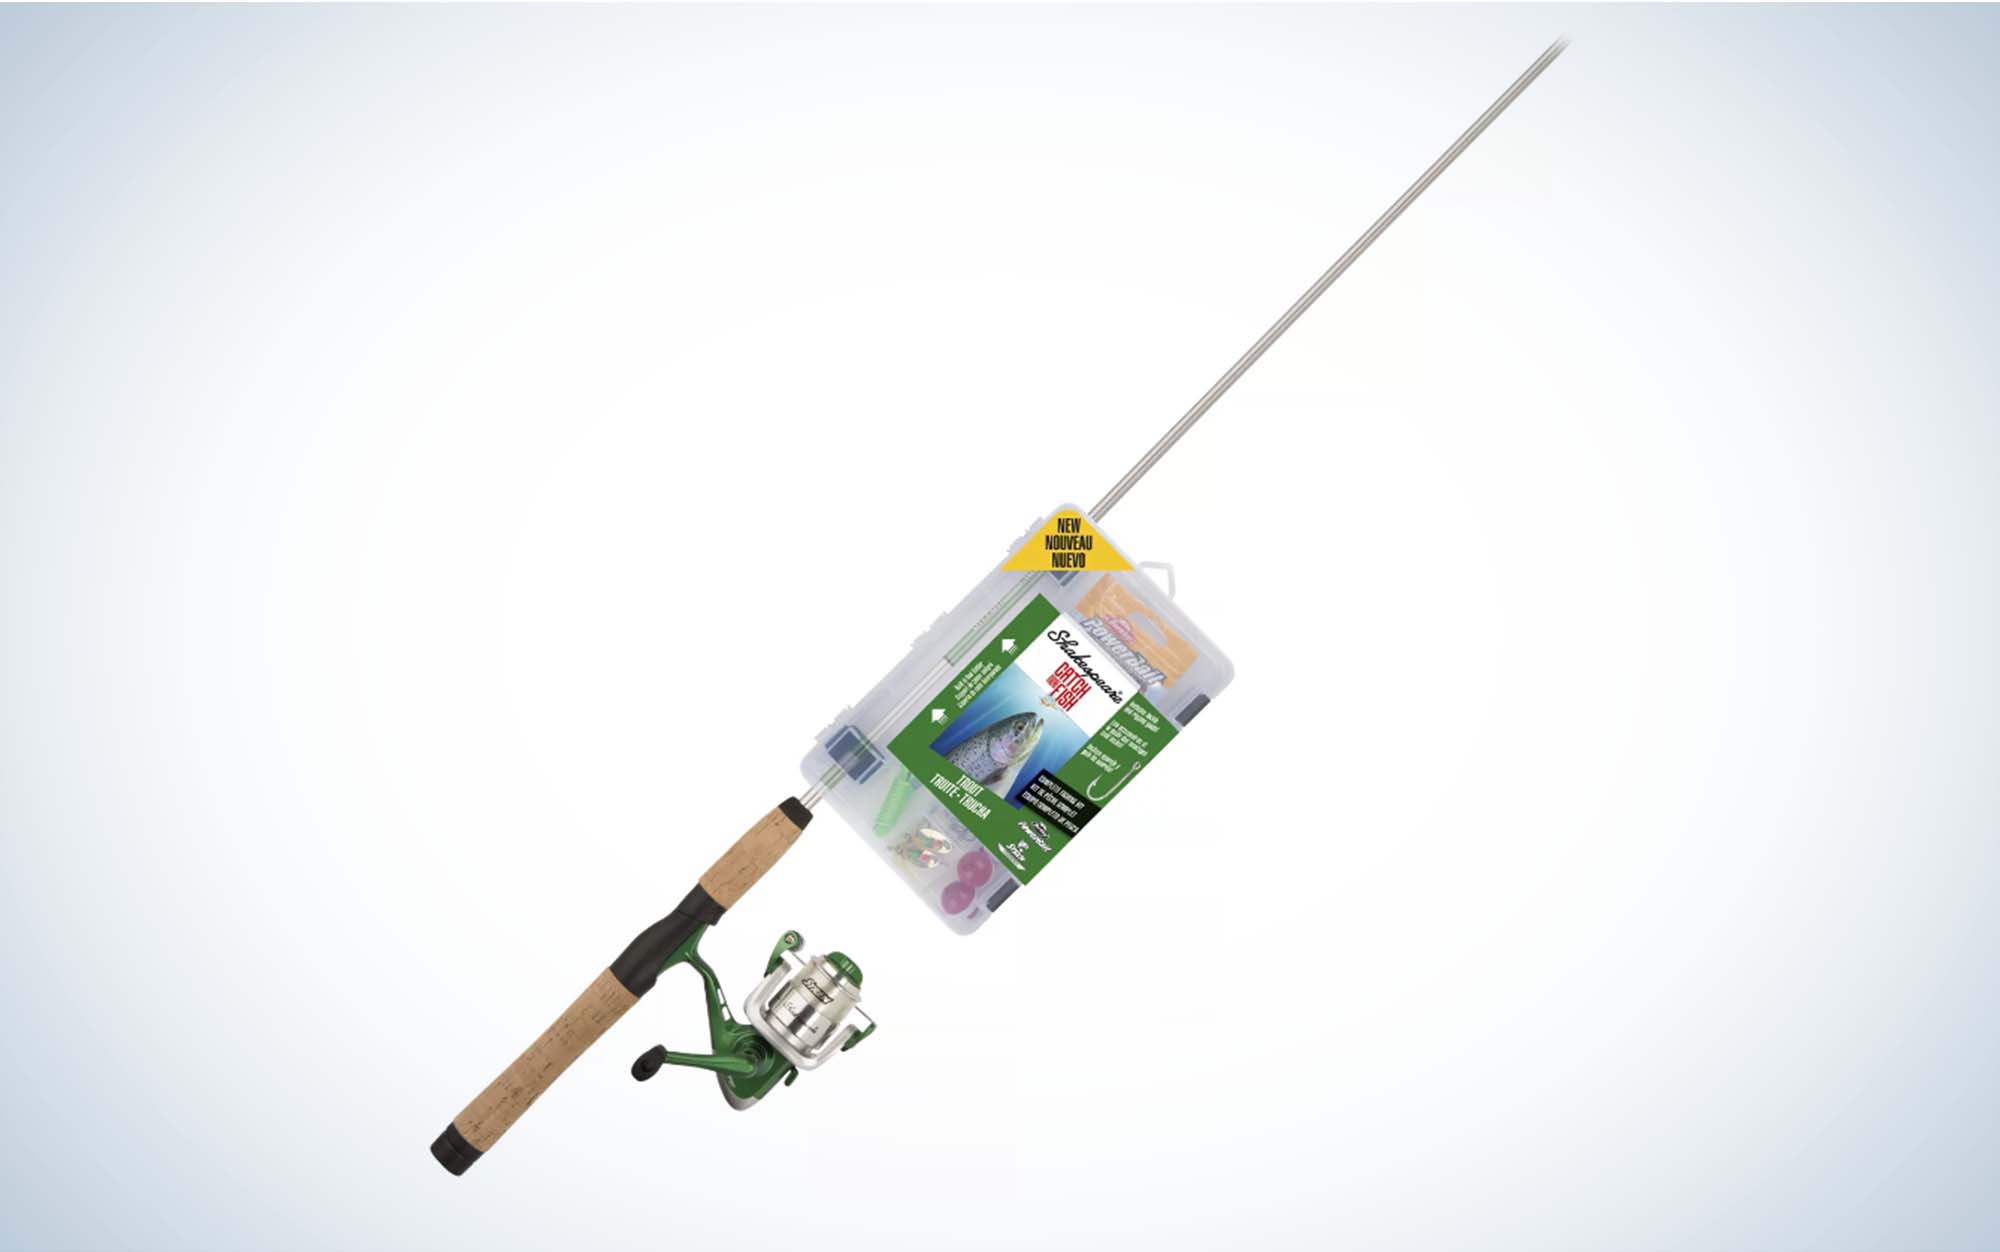 Shakespeare Catch More Fish Trout Spinning Fishing Rod and Reel